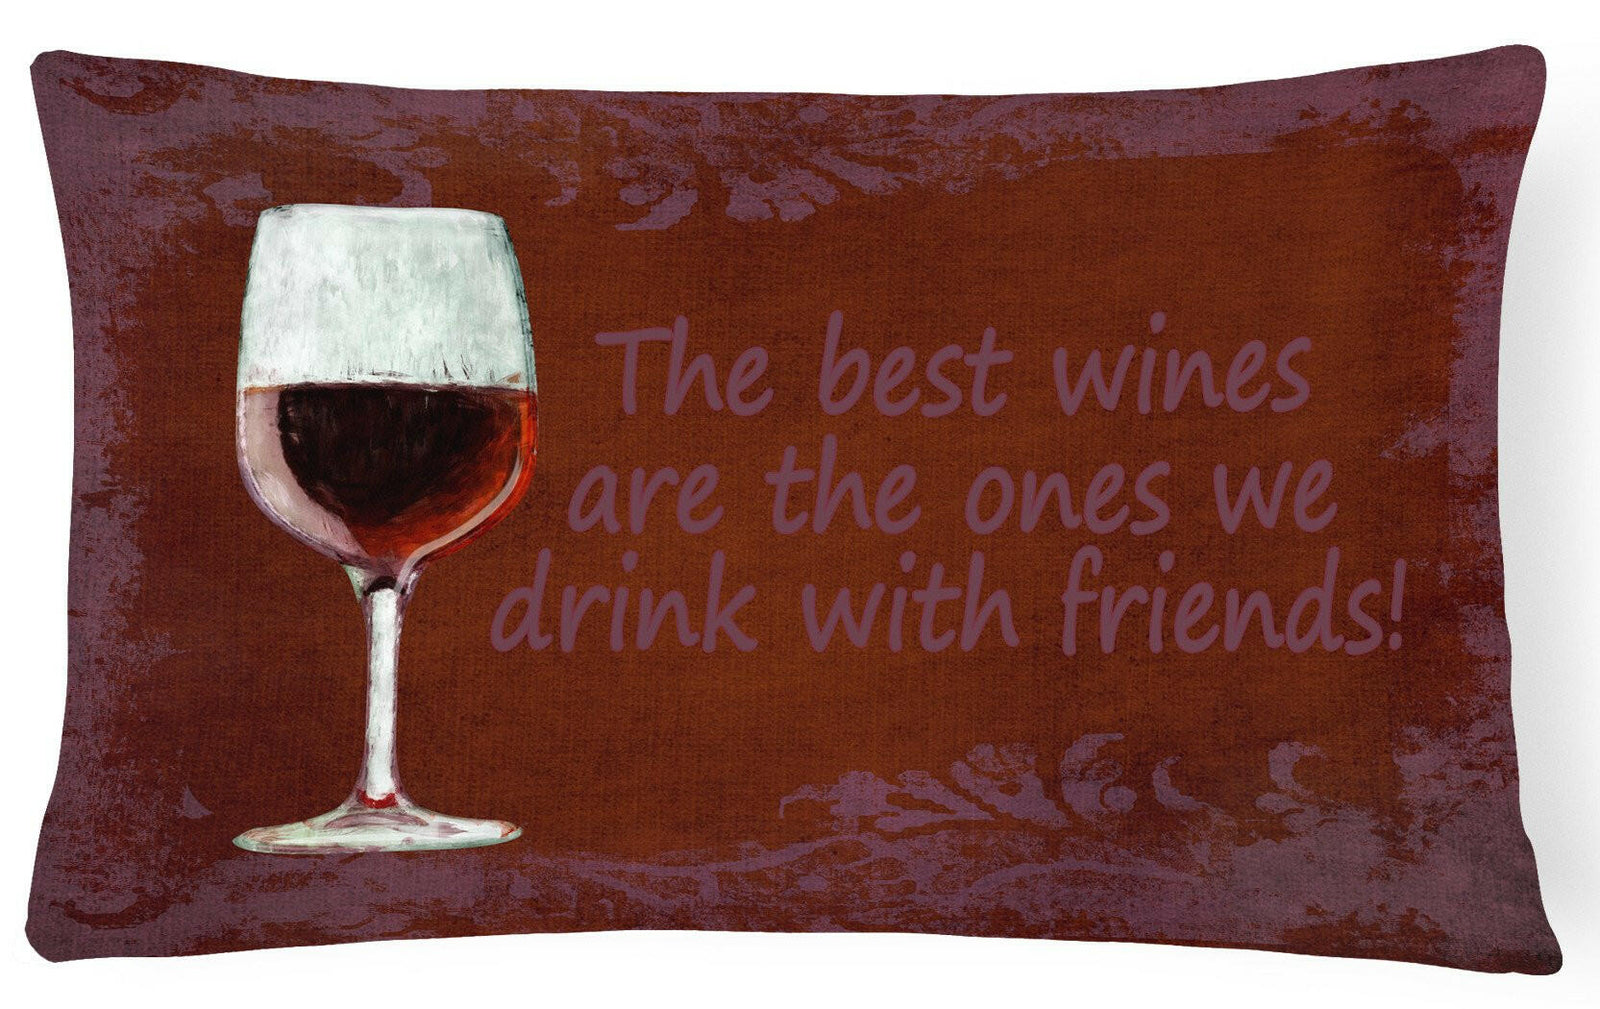 The best wines are the ones we drink with friends   Canvas Fabric Decorative Pillow SB3068PW1216 by Caroline's Treasures